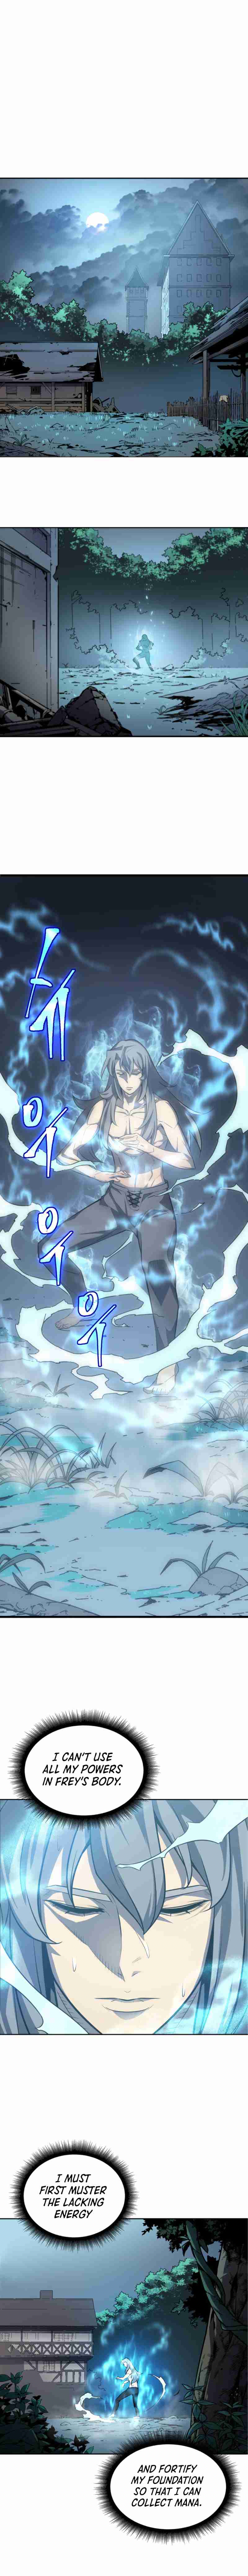 The Great Mage Returns After 4000 Years Ch. 3